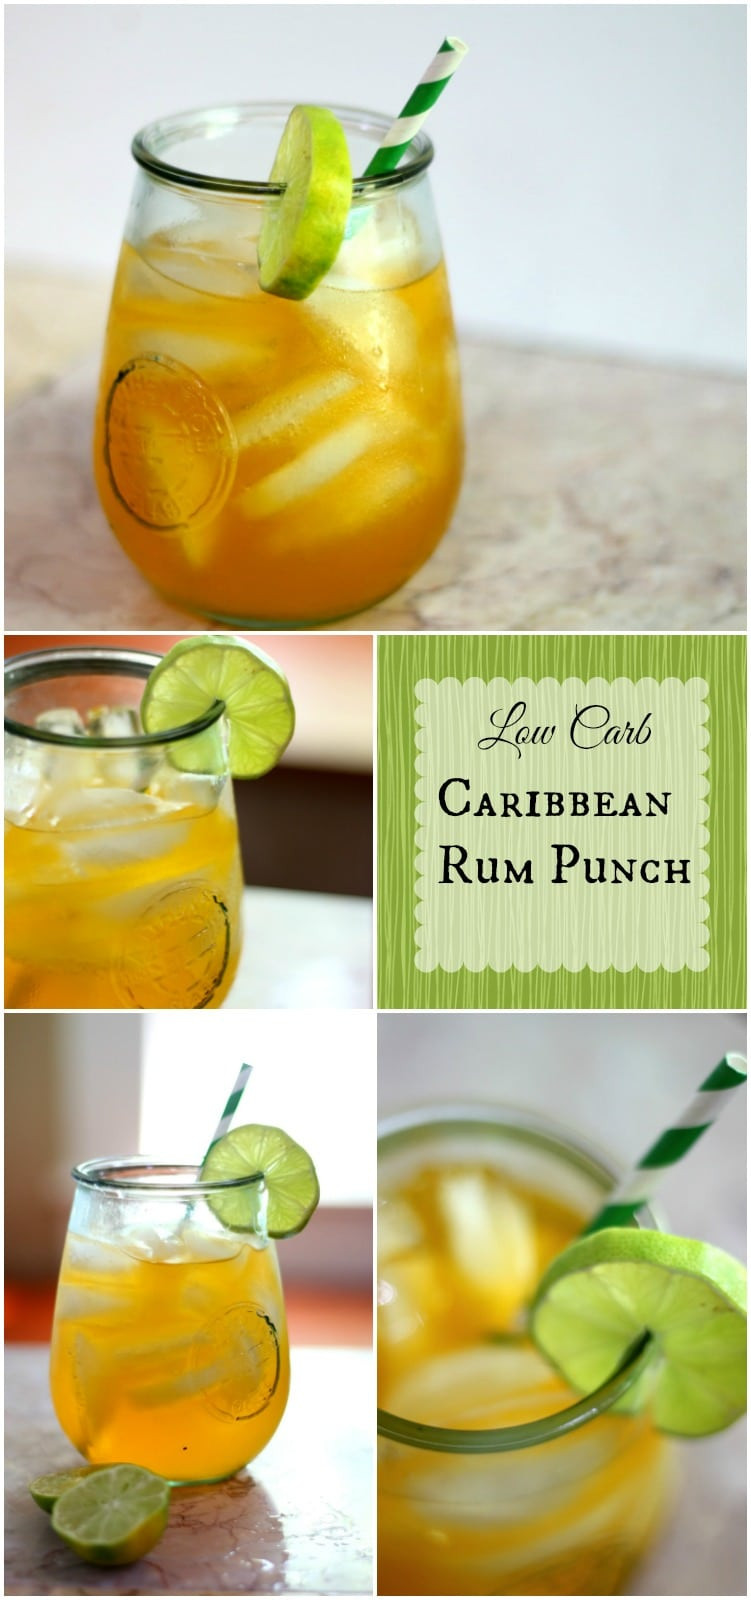 Low Carb Alcoholic Drink Recipes
 Low Carb Caribbean Rum Punch Cocktail Recipe lowcarb ology